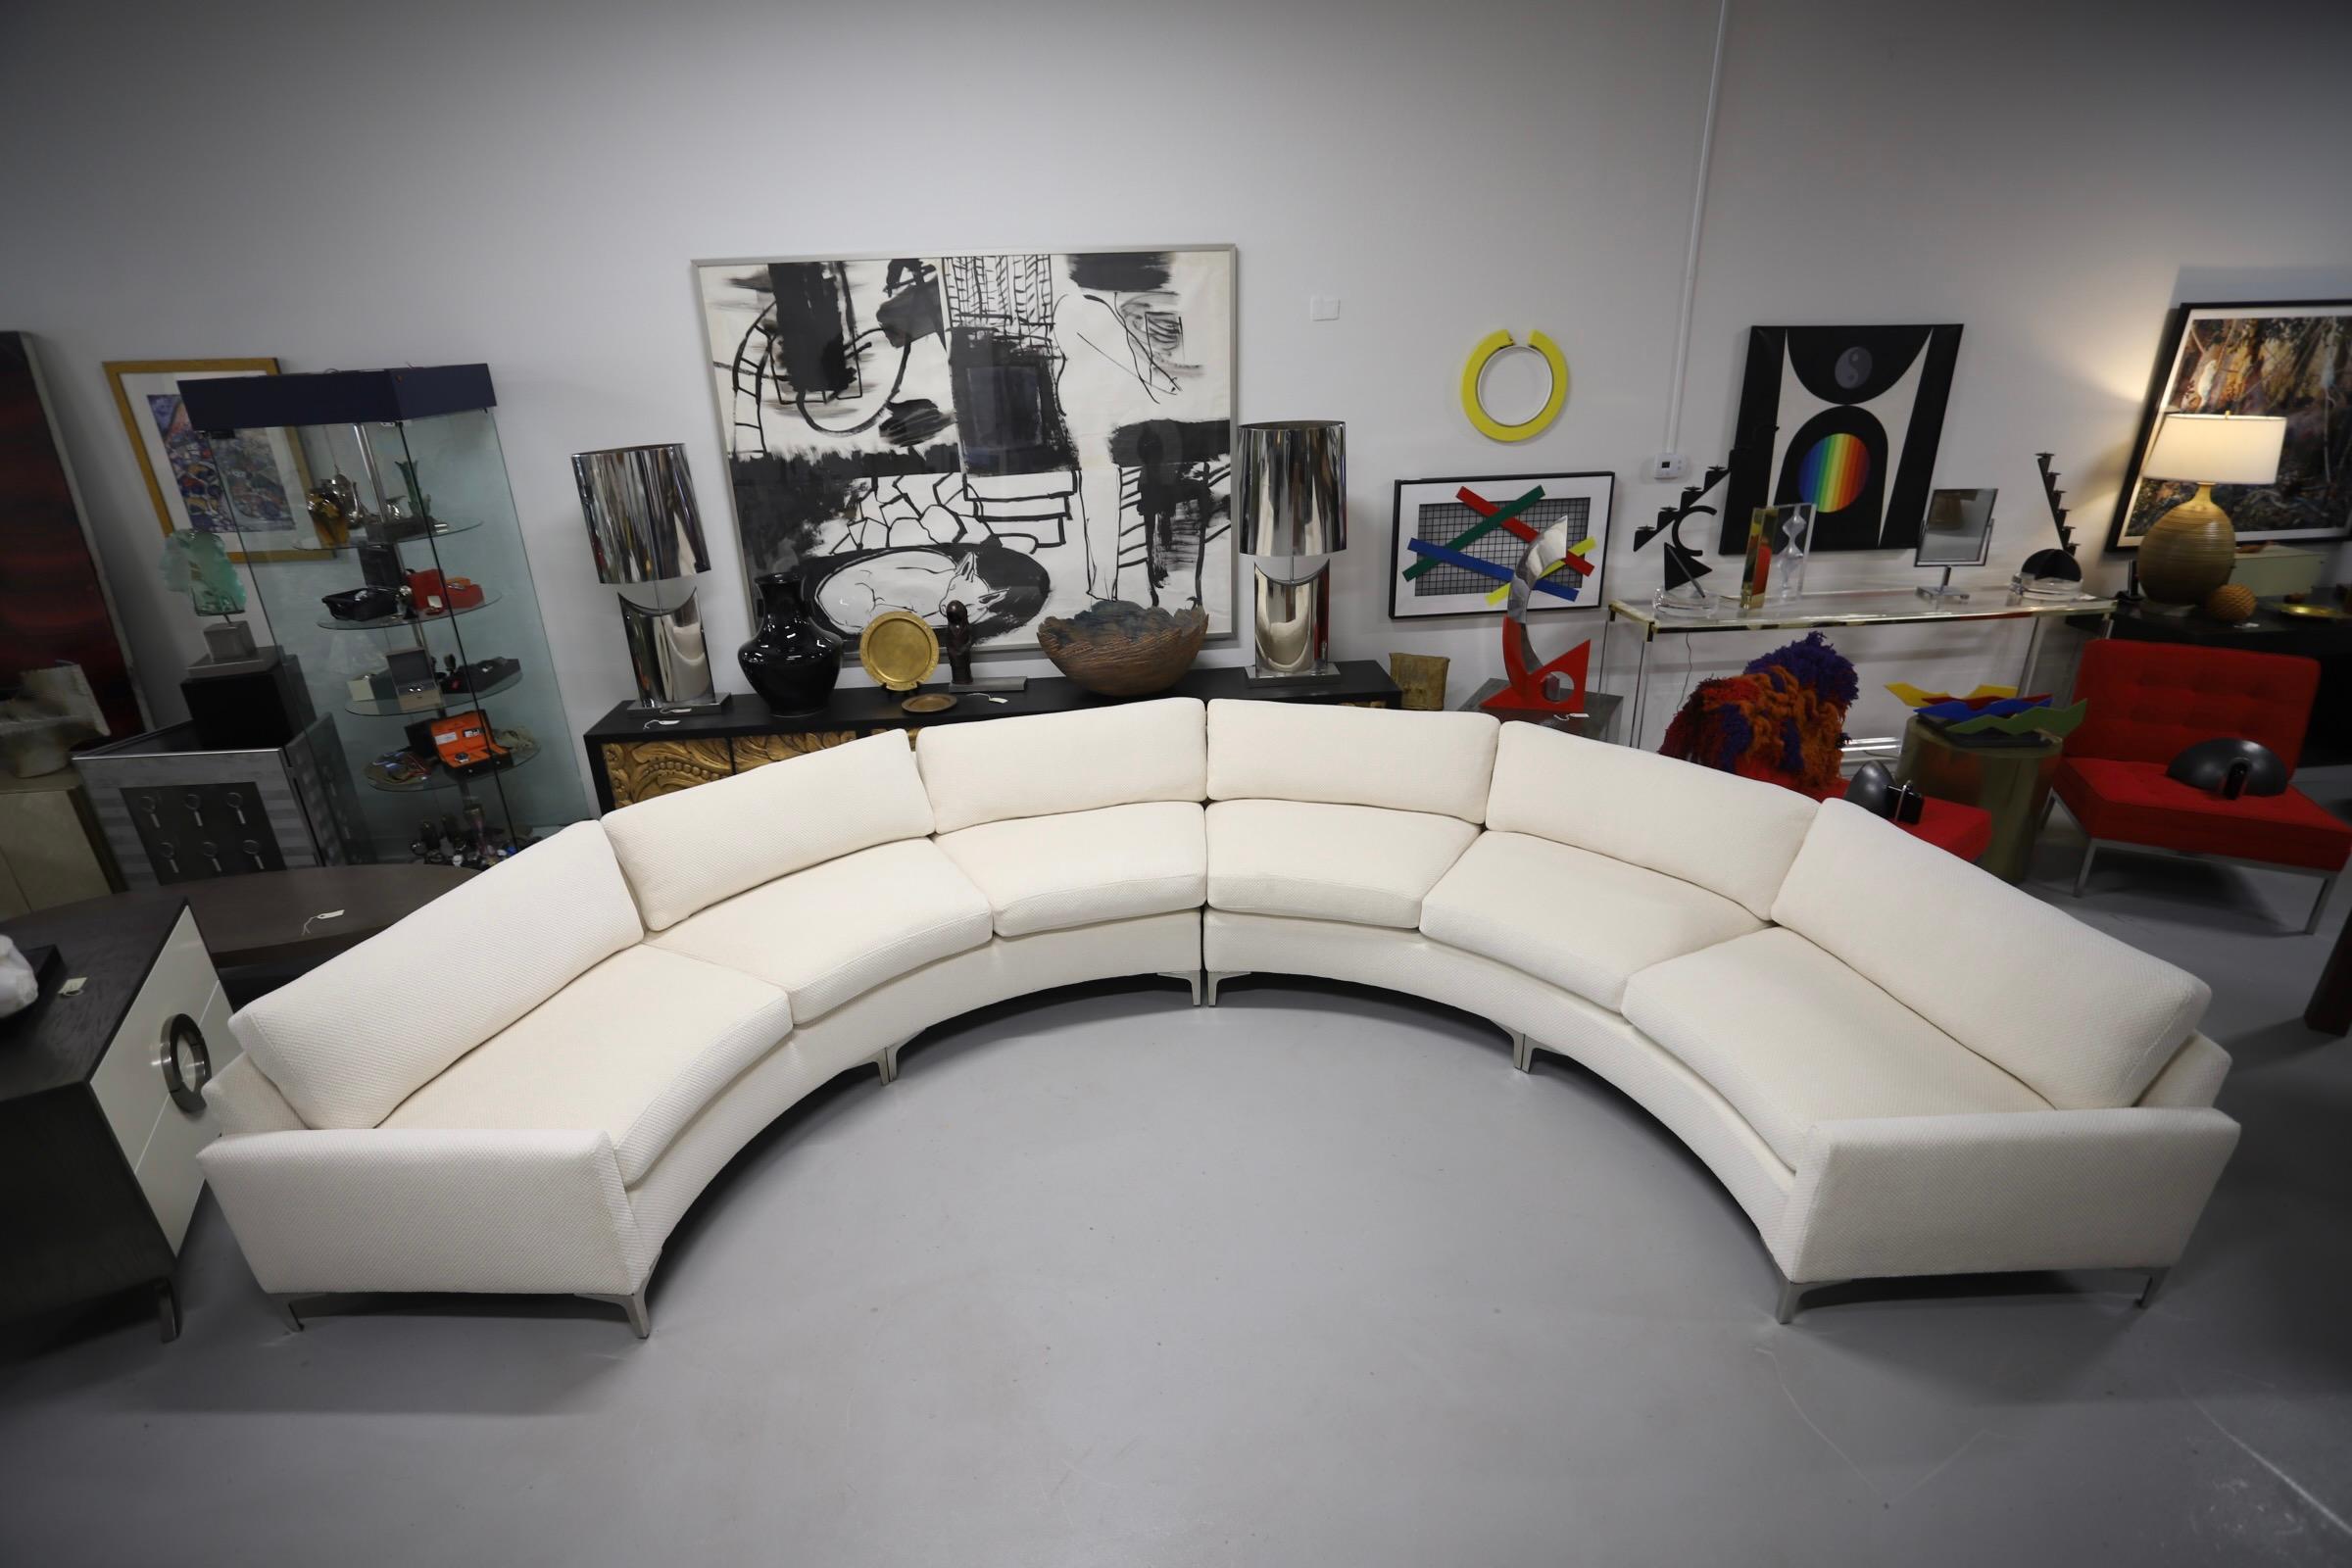 A large half circle sofa completely re-upholstered in a lovely Holly Hunt fabric. There are 2 sections. Streamlined metal legs. This sofa dates to the 1980s. It had a floral pattern on it from the estate it was purchased from. It is quite large